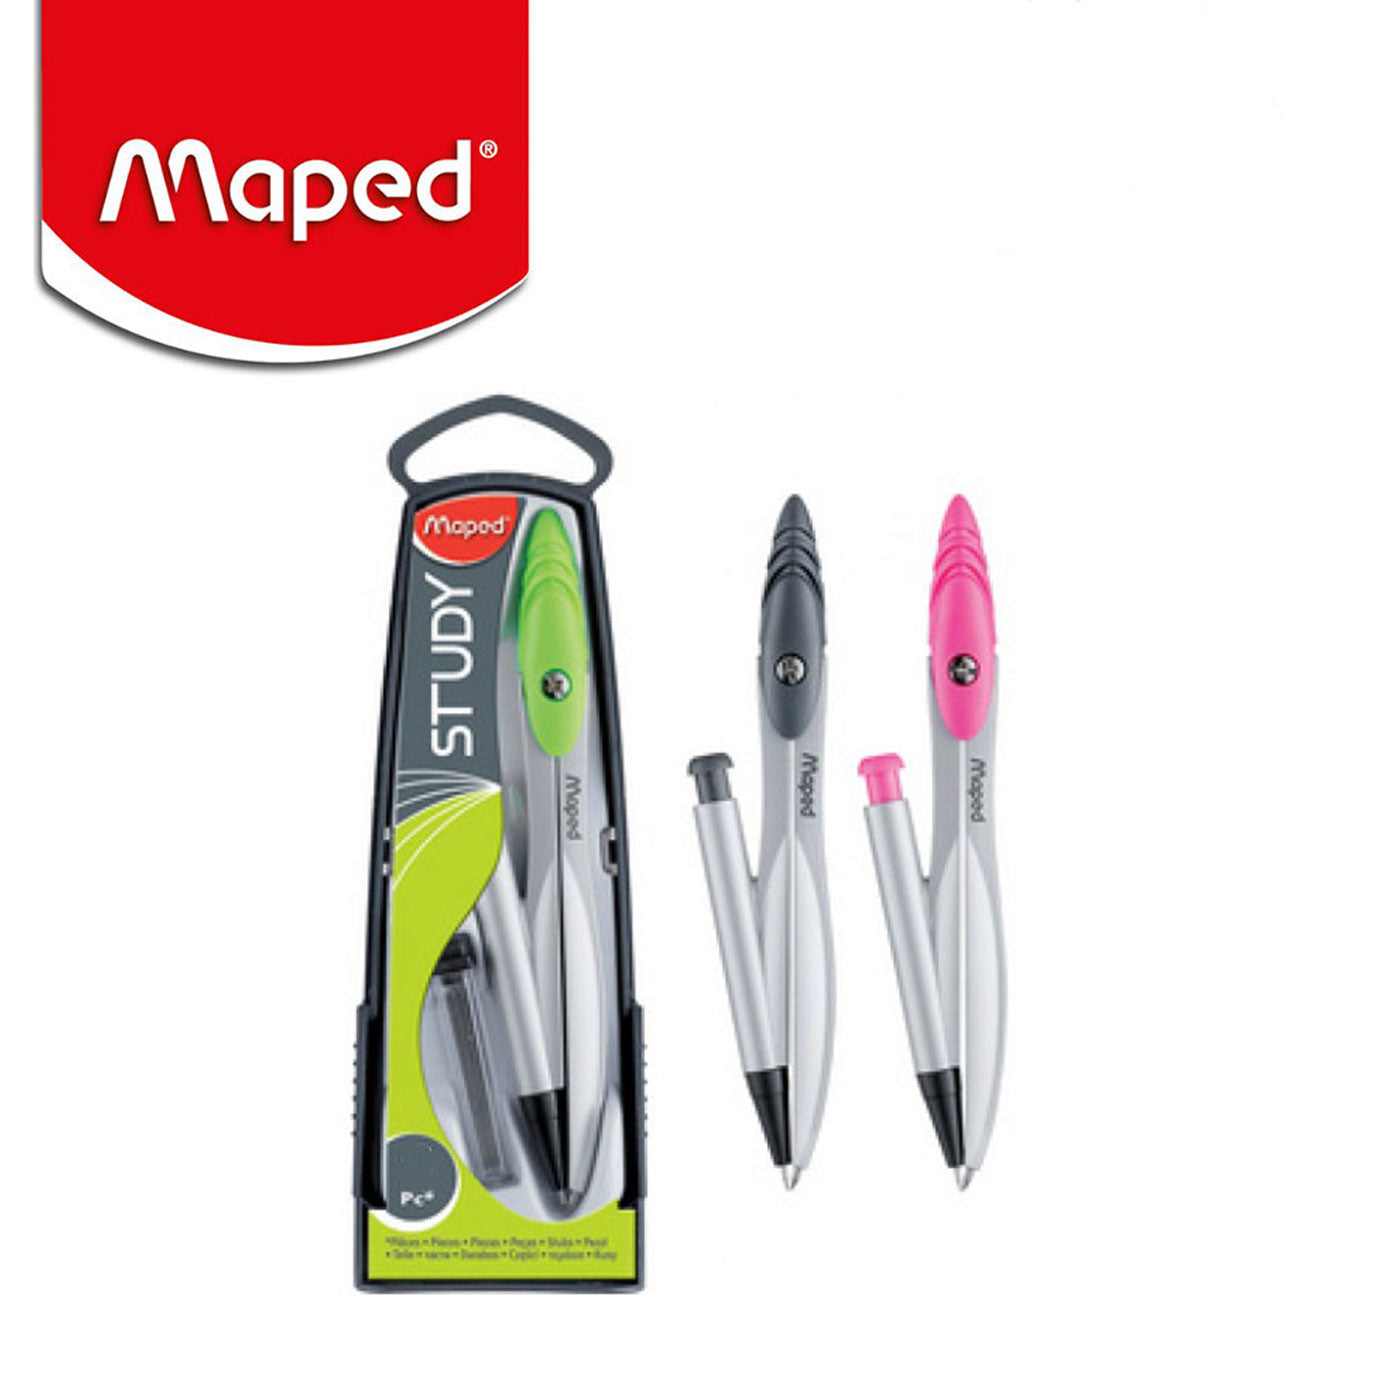 Maped Study Compass Metal with 0.5mm Mechanical Pencil